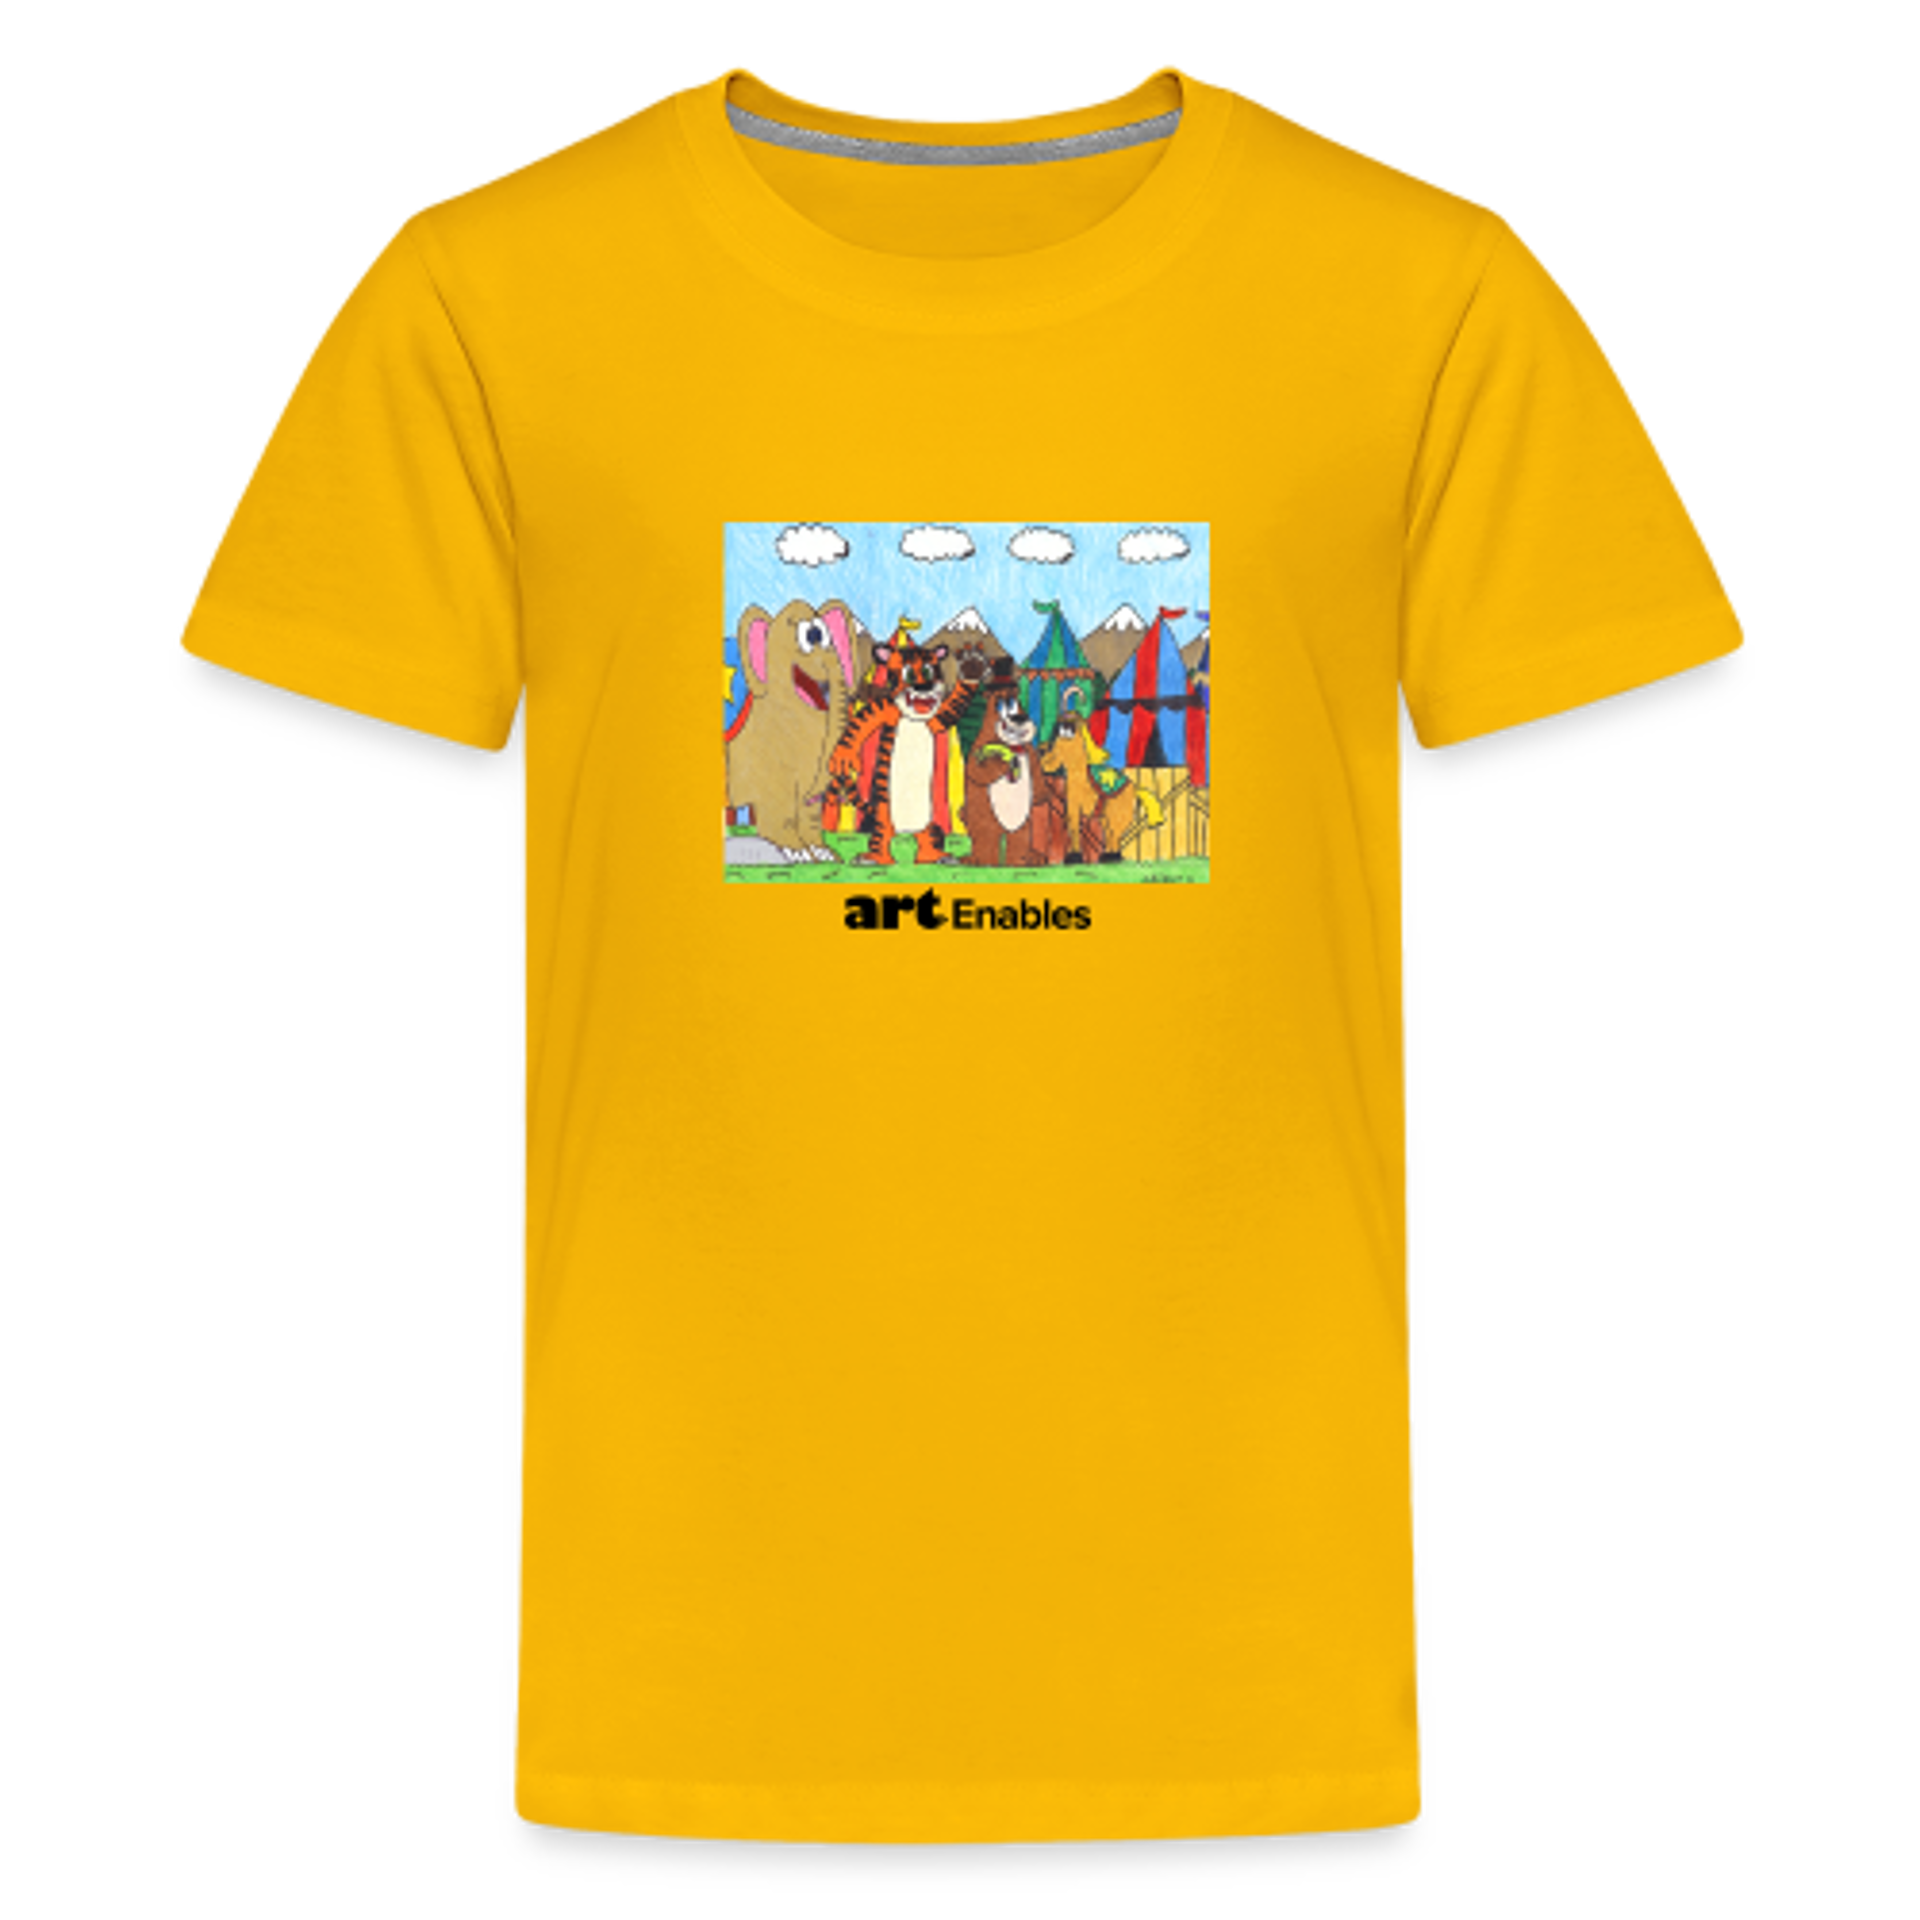 Youth T-shirt (artwork by Maurice Barnes) Small by Art Enables Merchandise